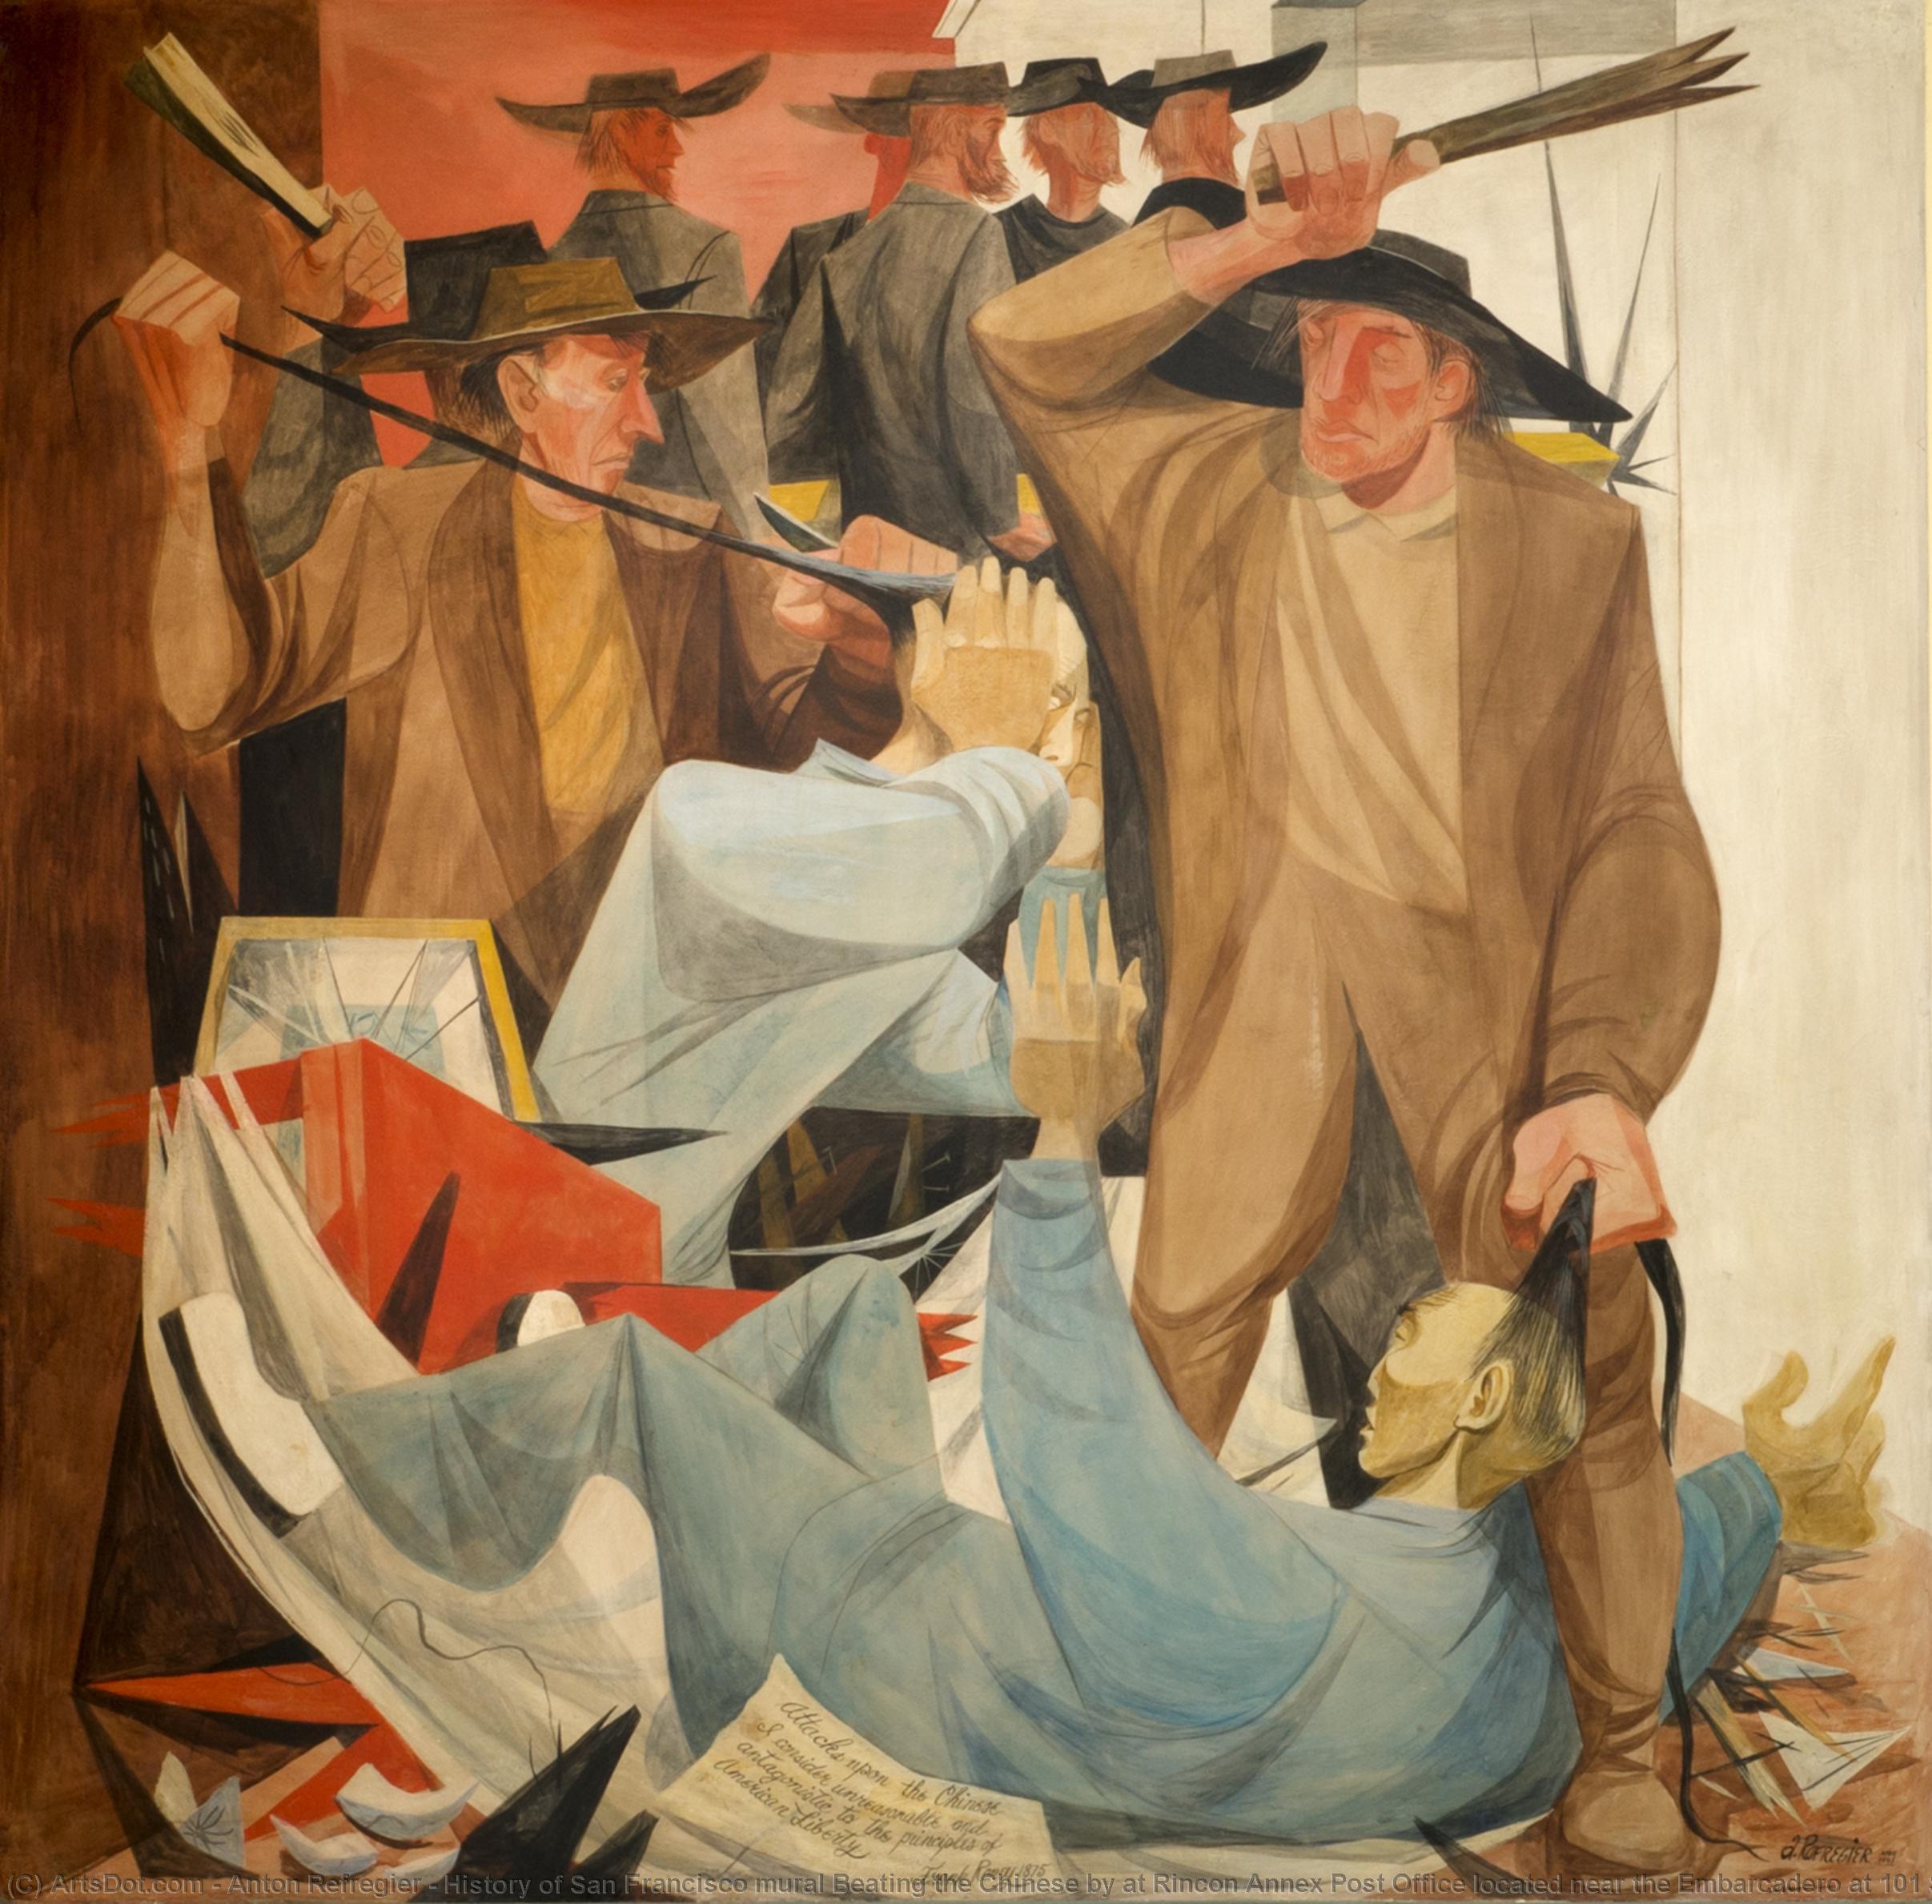 WikiOO.org - Encyclopedia of Fine Arts - Lukisan, Artwork Anton Refregier - History of San Francisco mural Beating the Chinese by at Rincon Annex Post Office located near the Embarcadero at 101 Spear Street, San Francisco, California